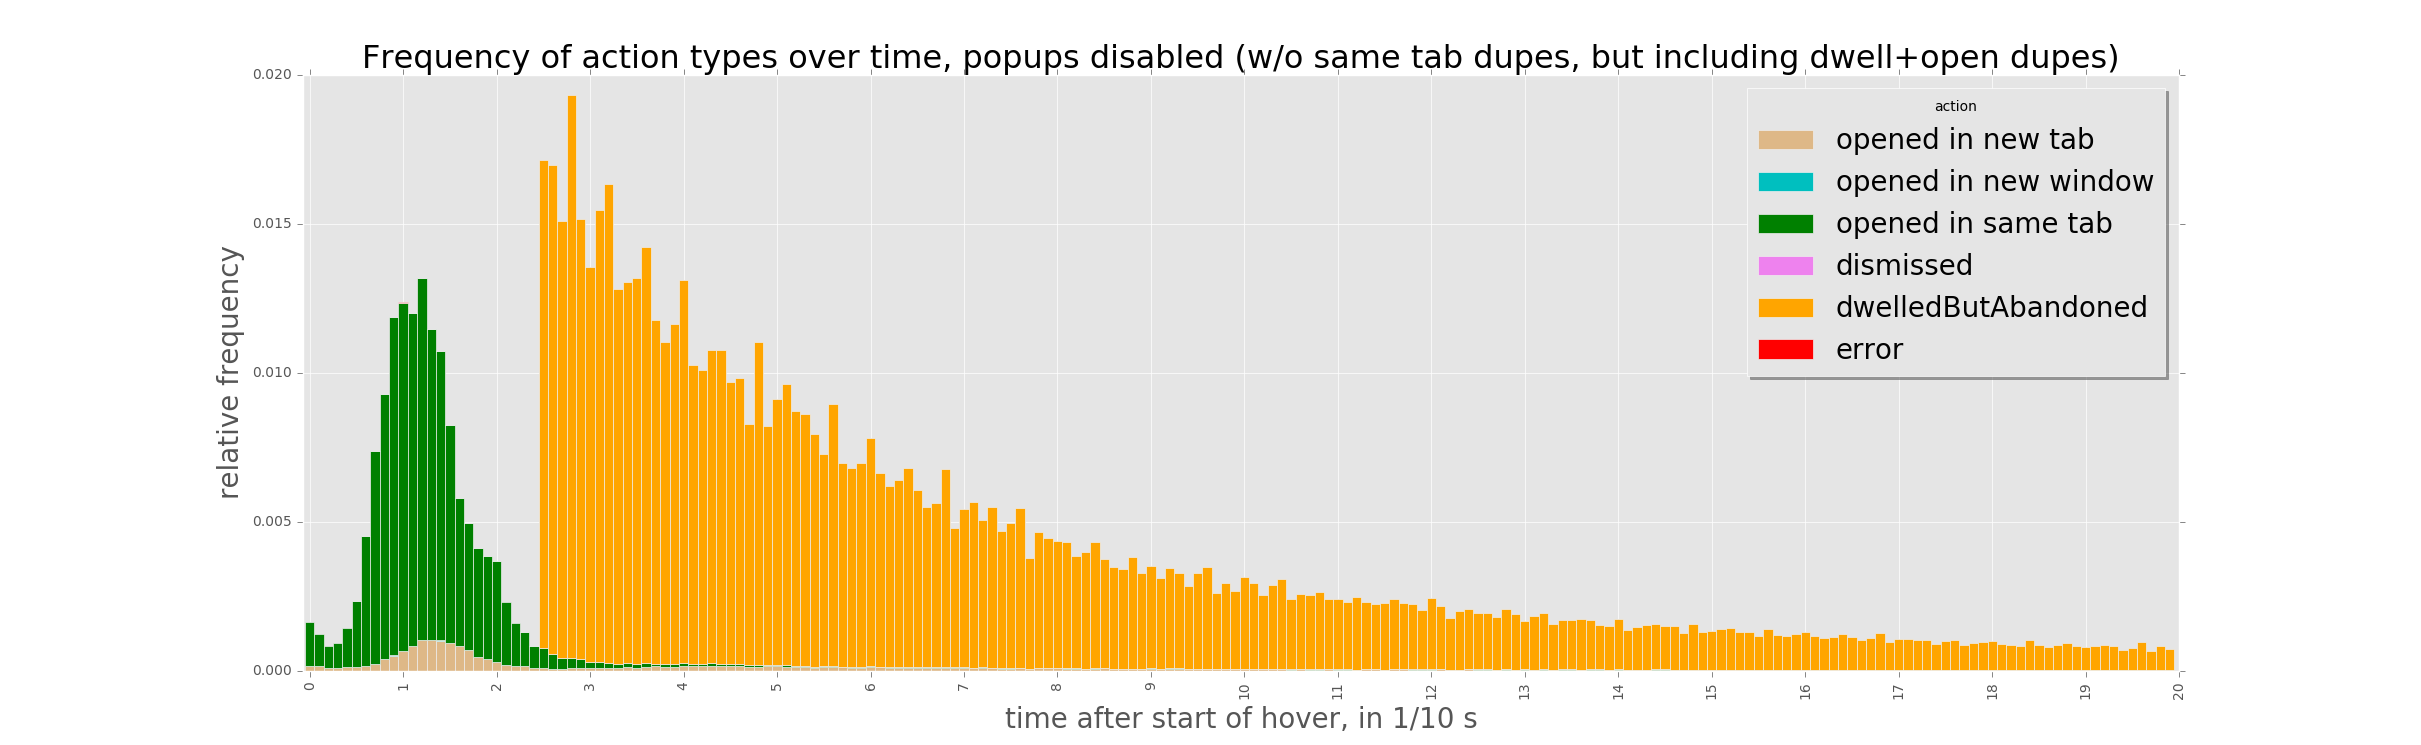 Frequency of action types over time (including dwell+open dupes, removing open dupes), popups disabled.png (745×2 px, 97 KB)